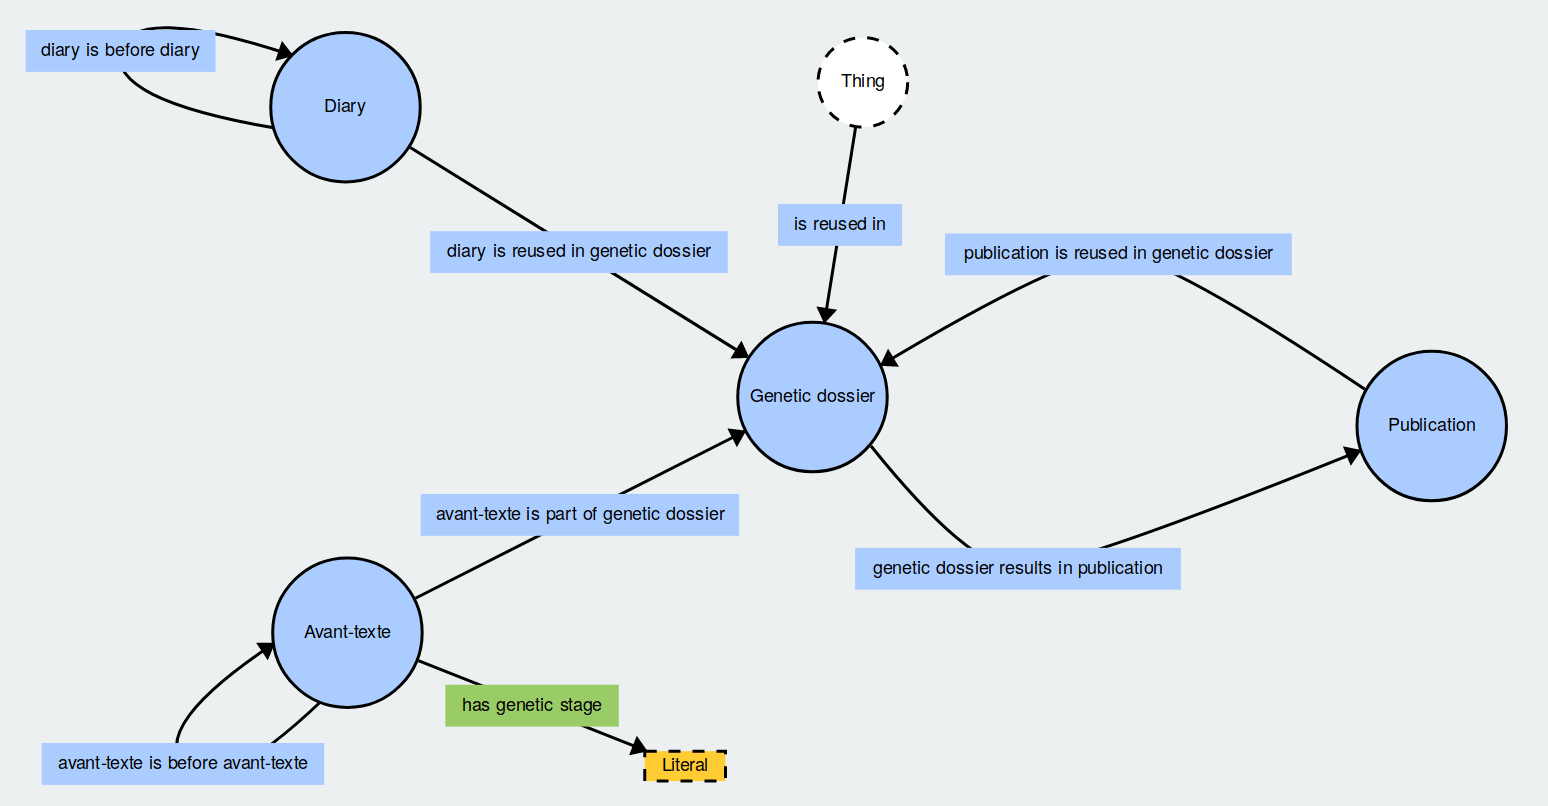 Visual rendering of the ontology, produced with WebVOWL.